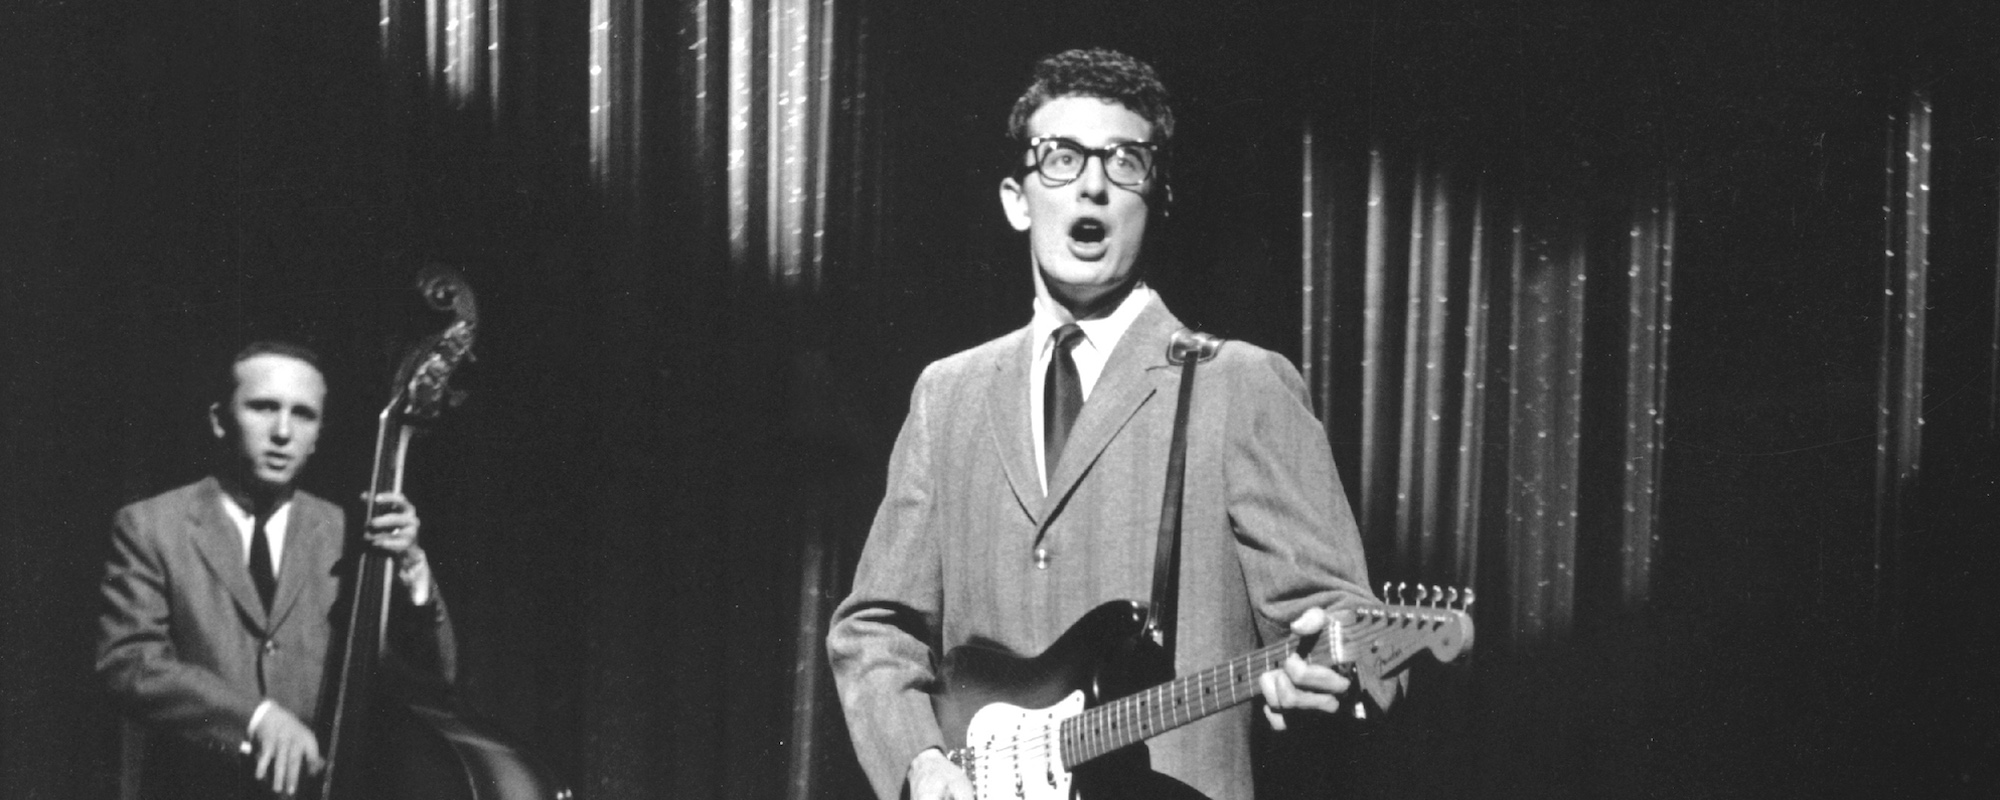 On This Day: Buddy Holly Finished Recording His Final Songs Inside His New York City Apartment